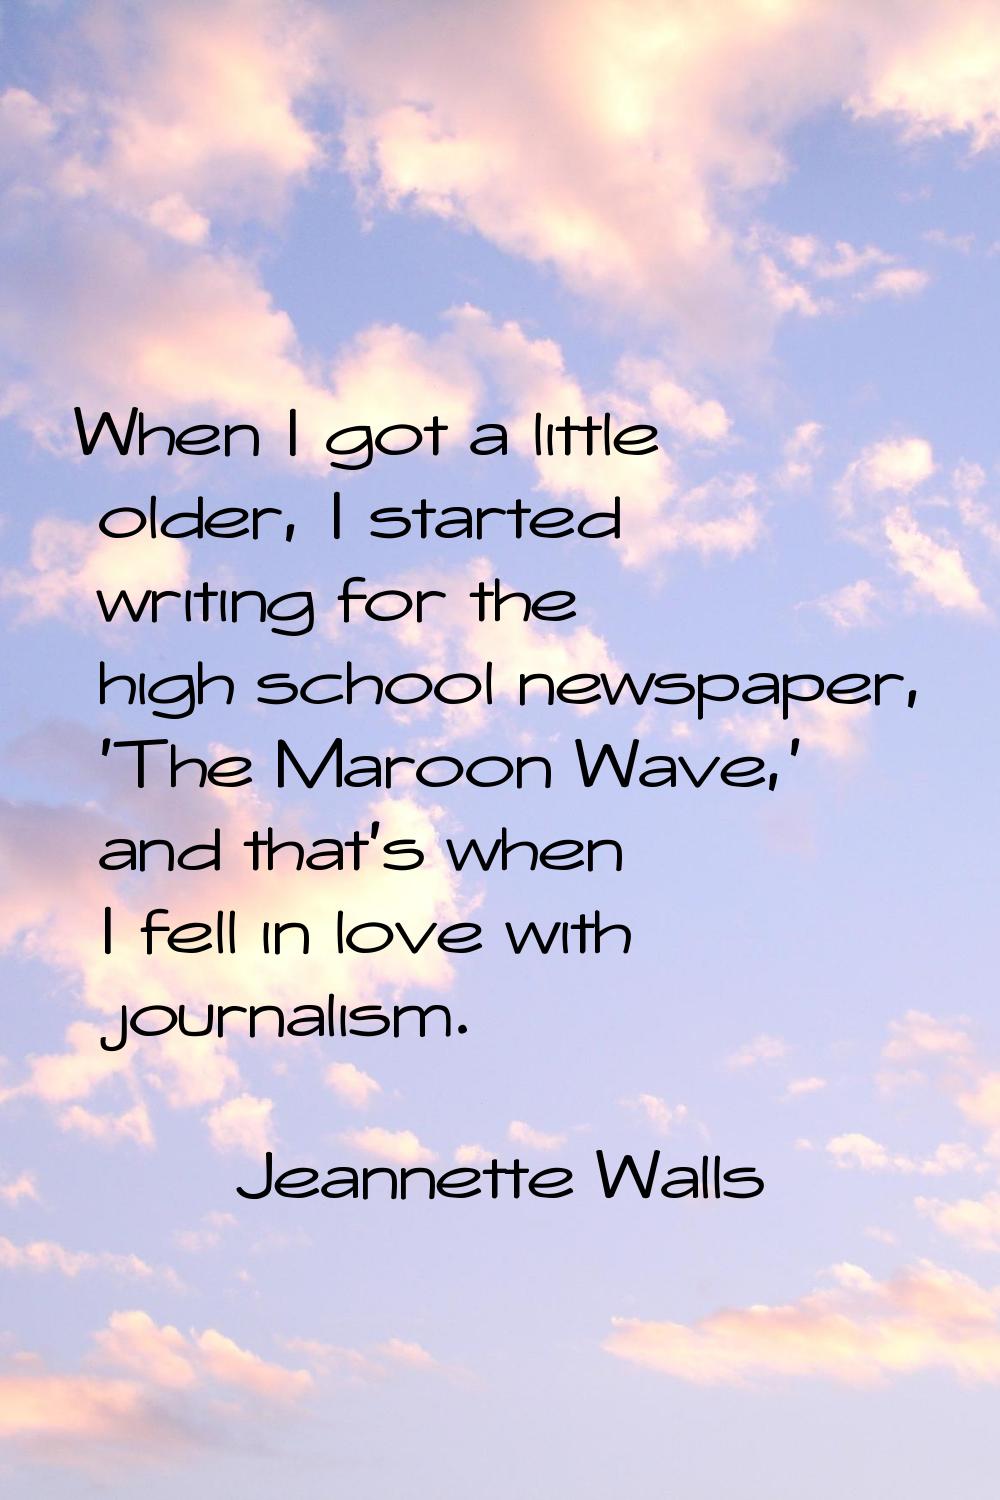 When I got a little older, I started writing for the high school newspaper, 'The Maroon Wave,' and 